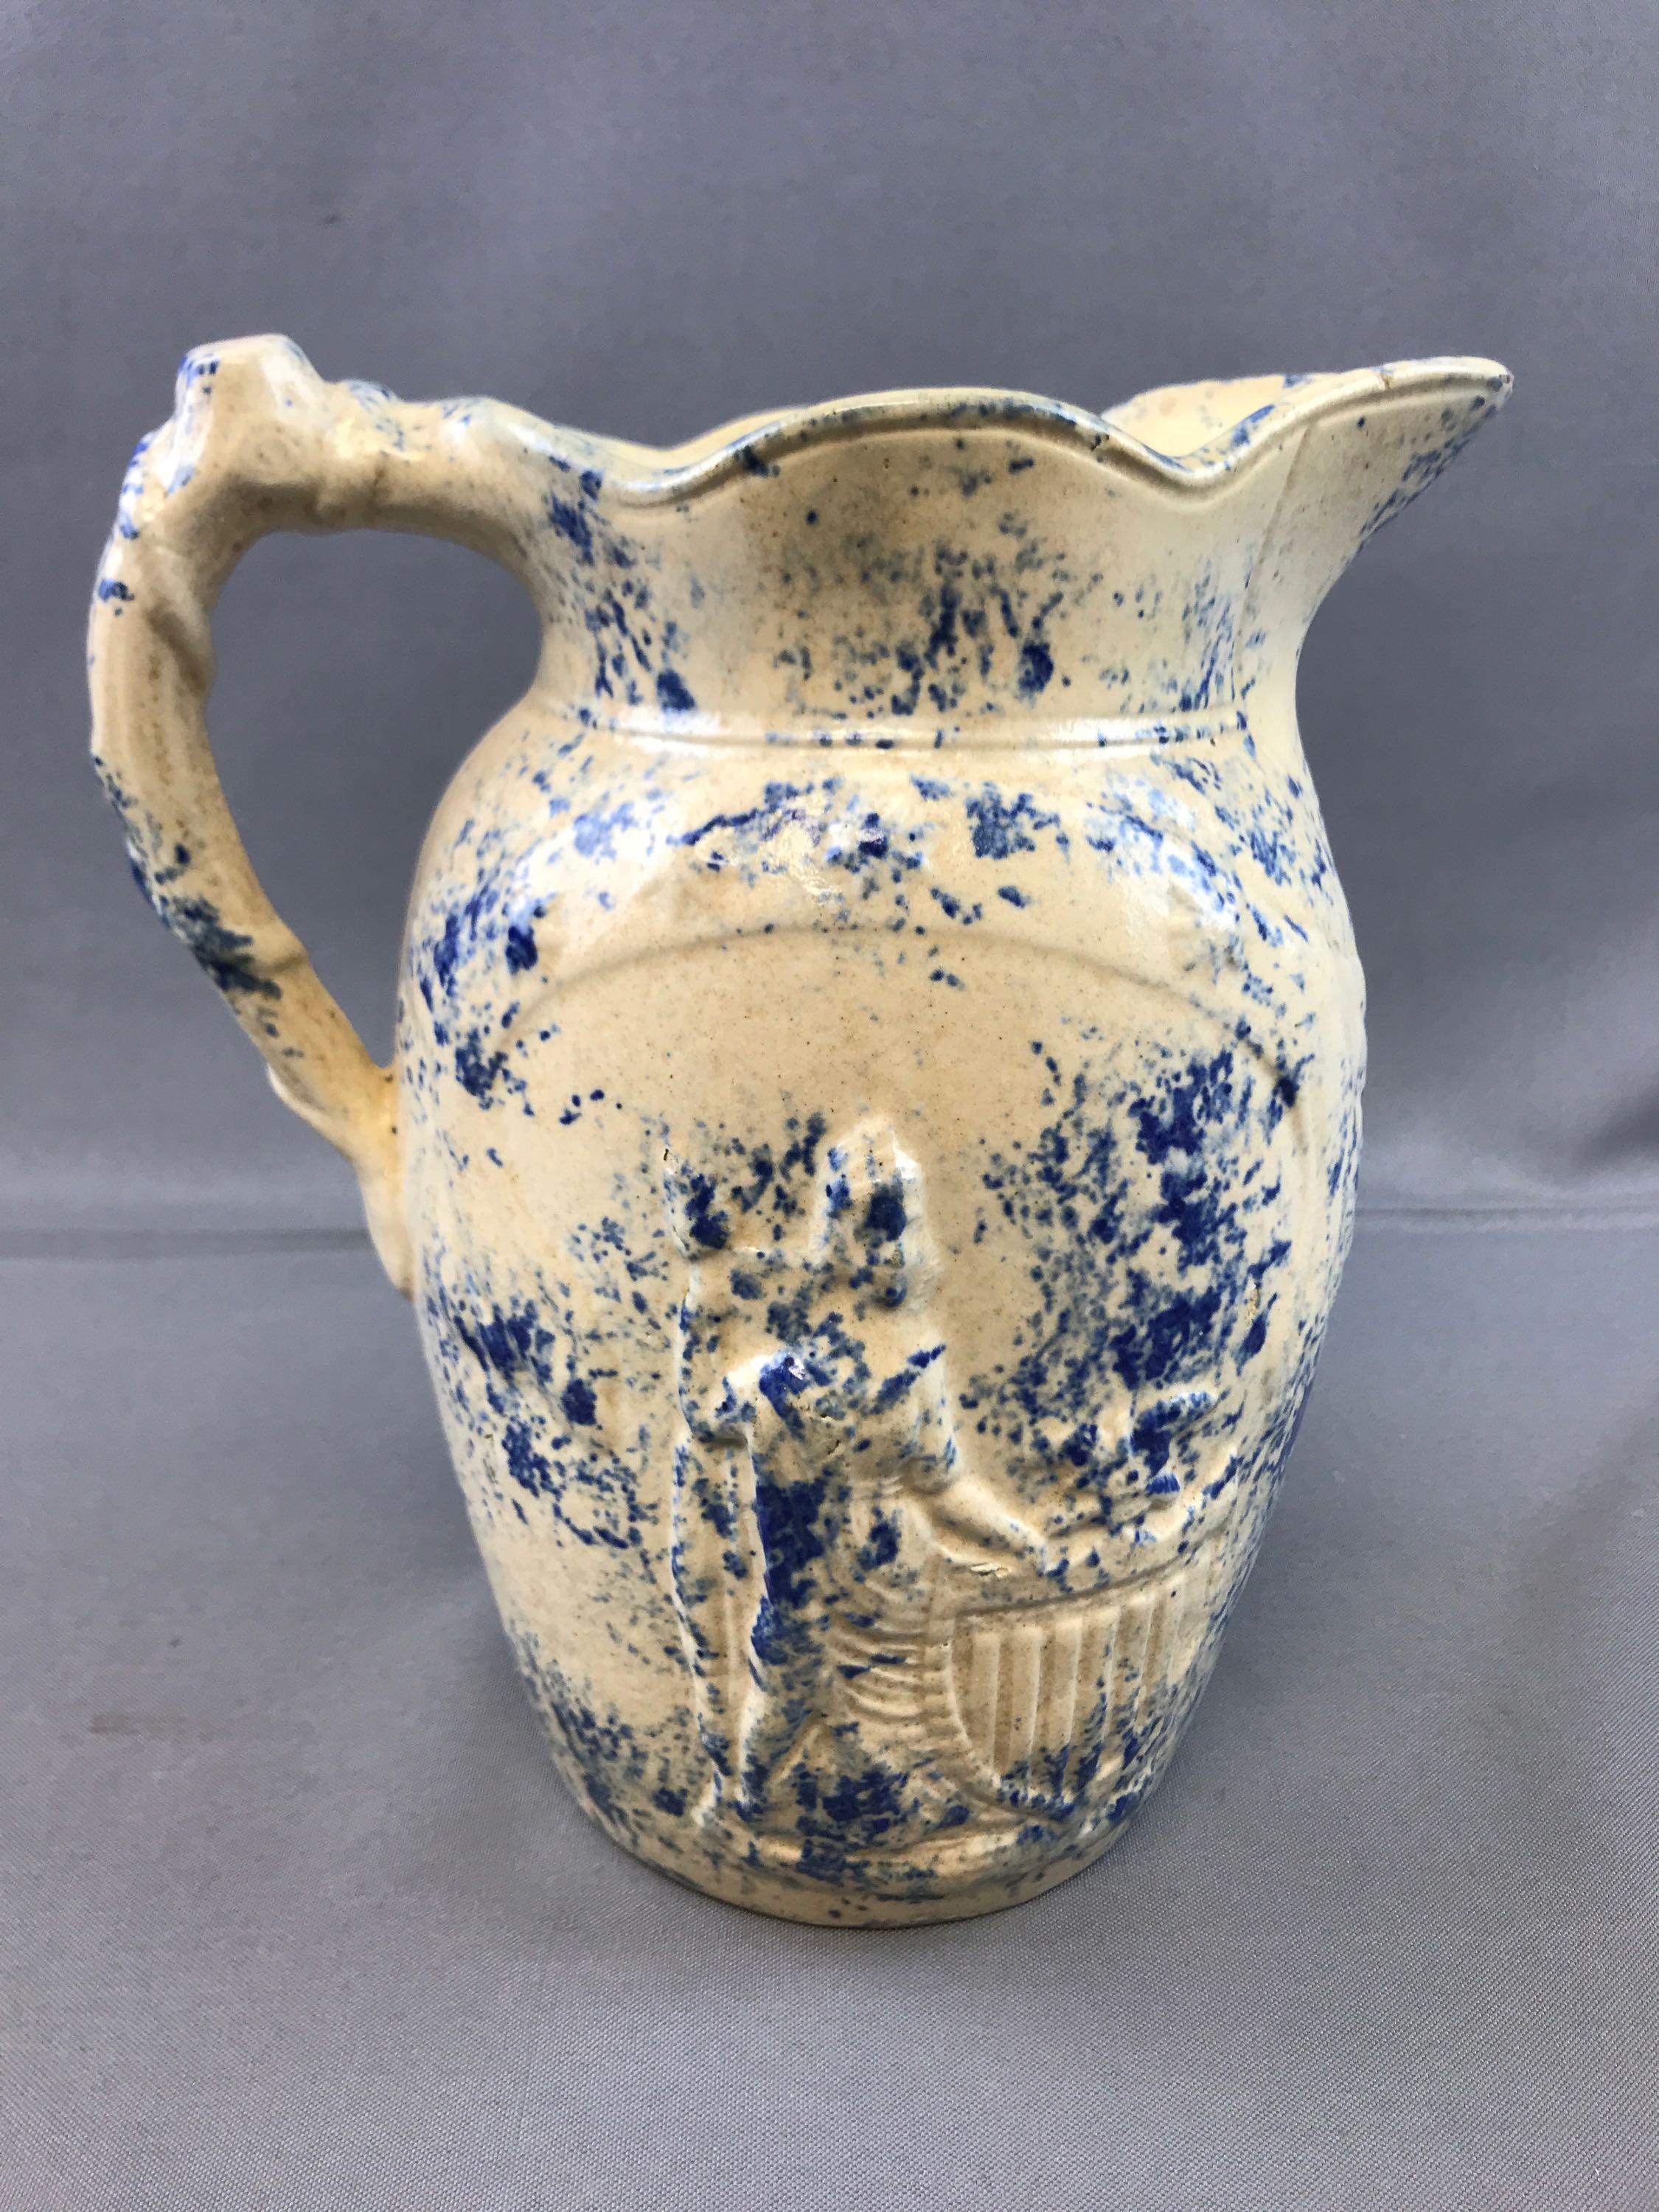 Antique Blue and White Spongeware Pottery Pitcher